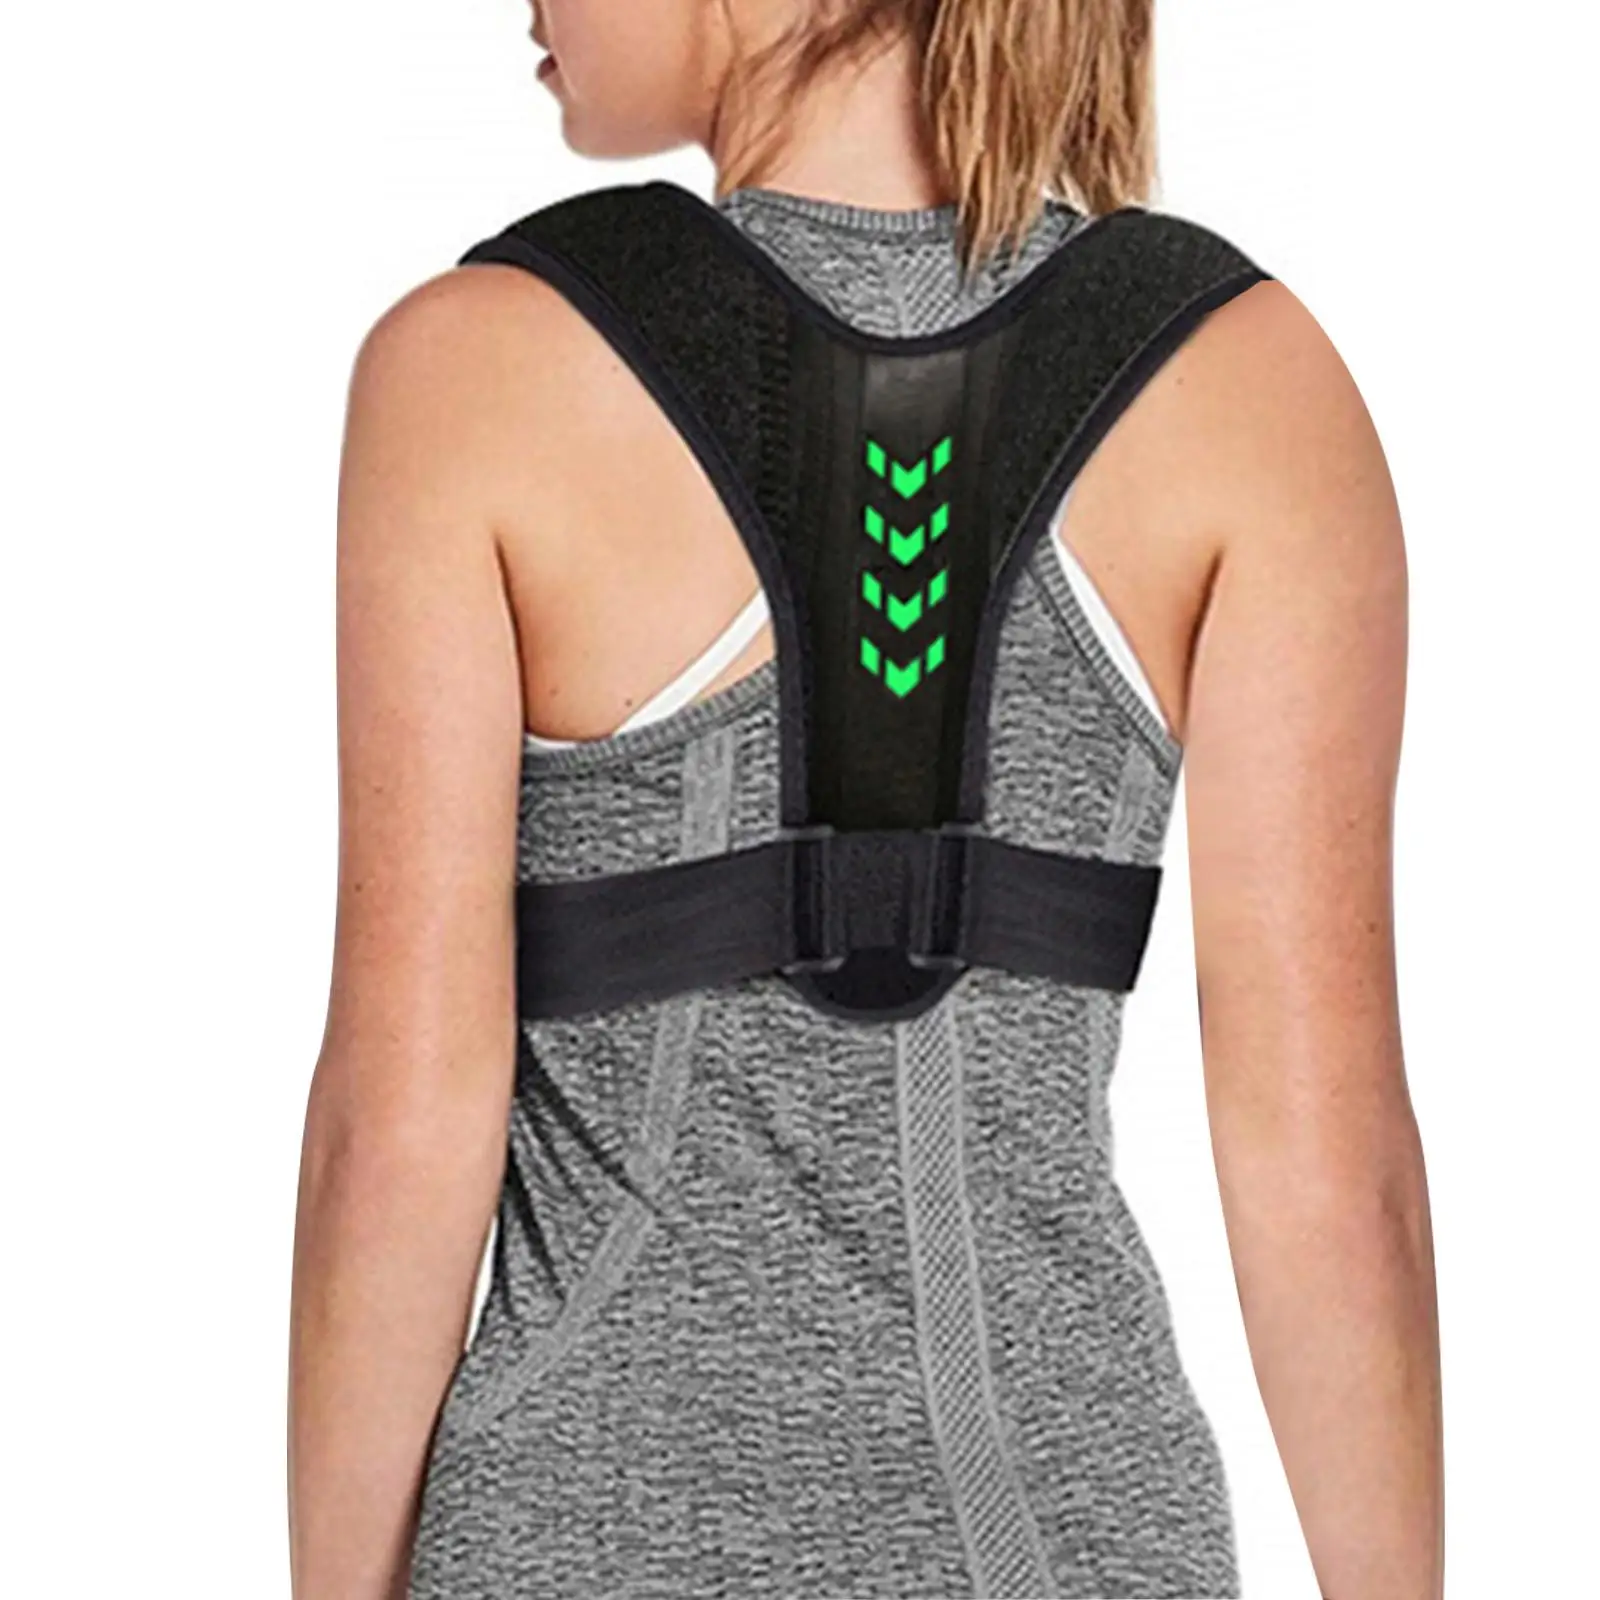 Posture Corrector Breathable Upper support Back Straighter Invisible